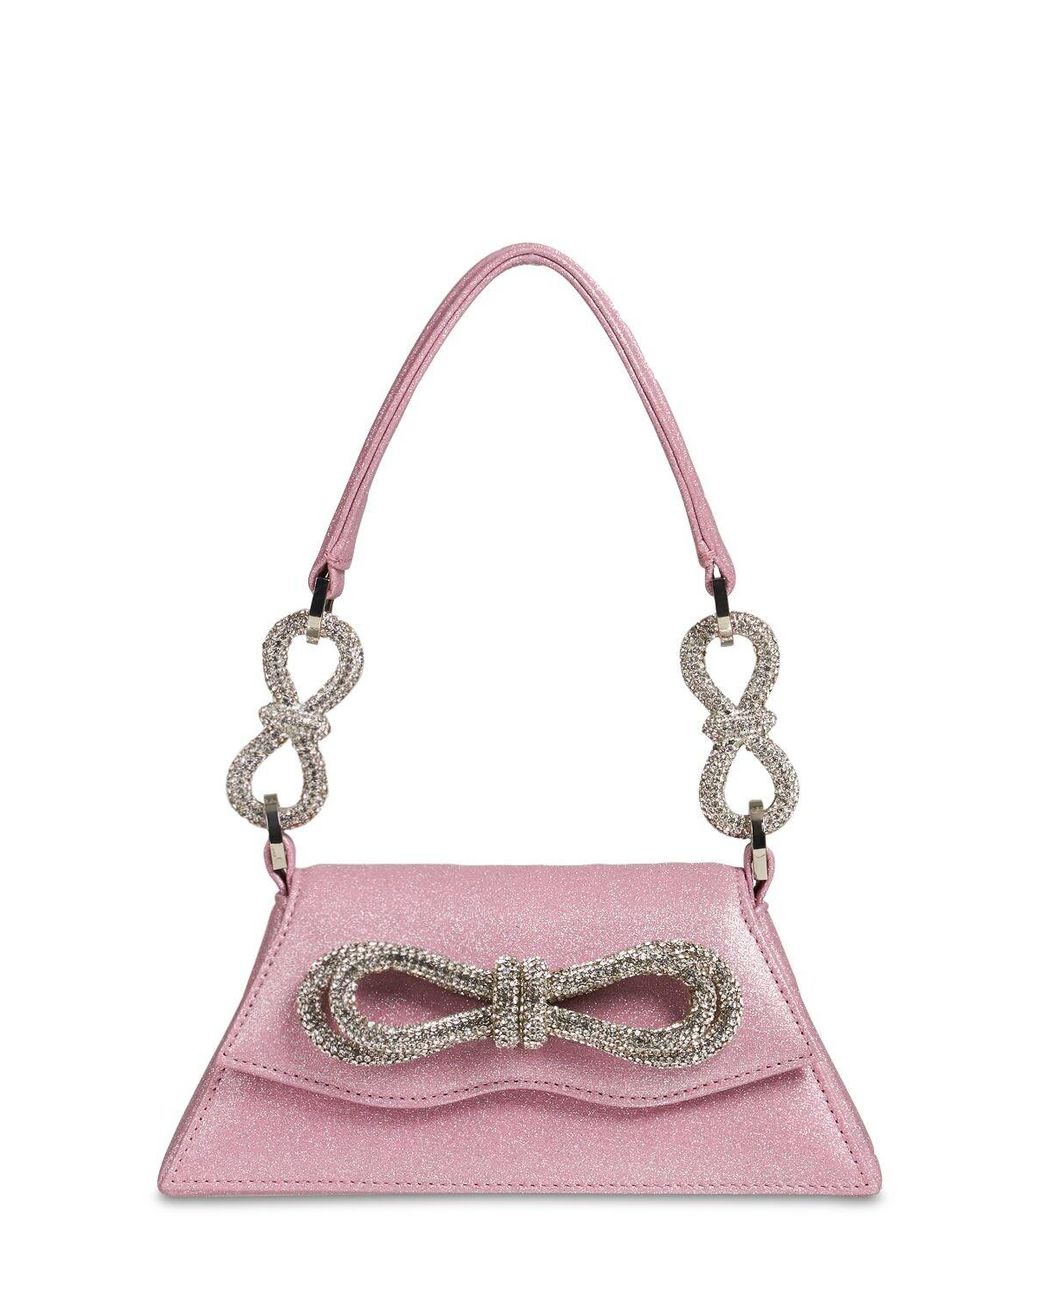 Miu Miu Authentic Pink Sequin Heart Velvet Bow Bag Charm - $286 - From  SAMANTHA